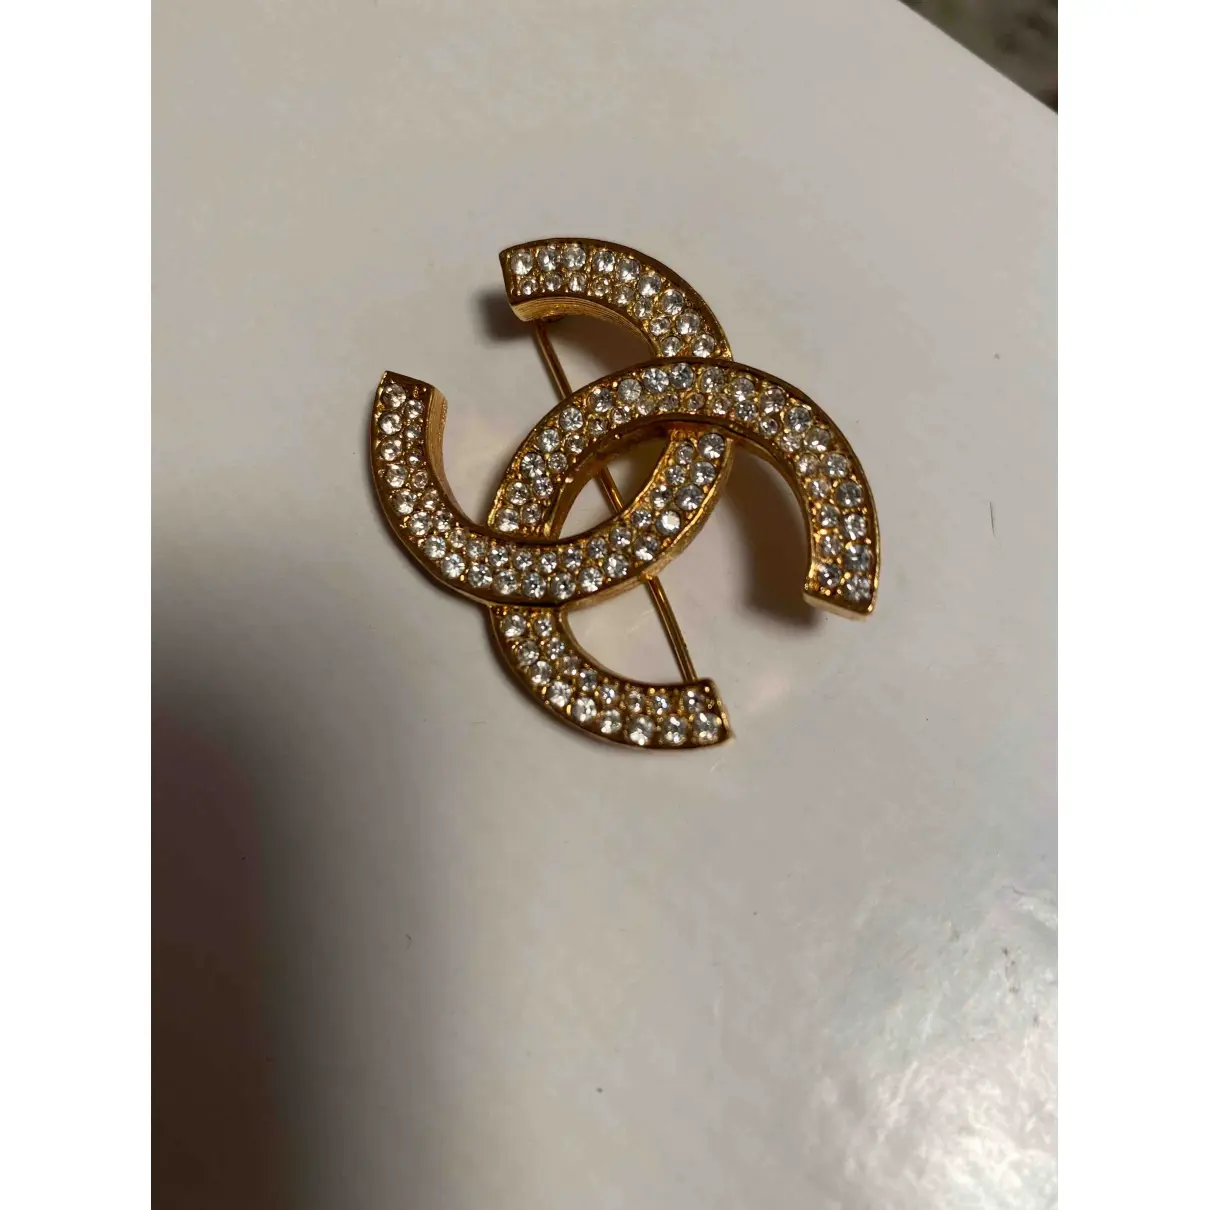 Buy Chanel CC pin & brooche online - Vintage